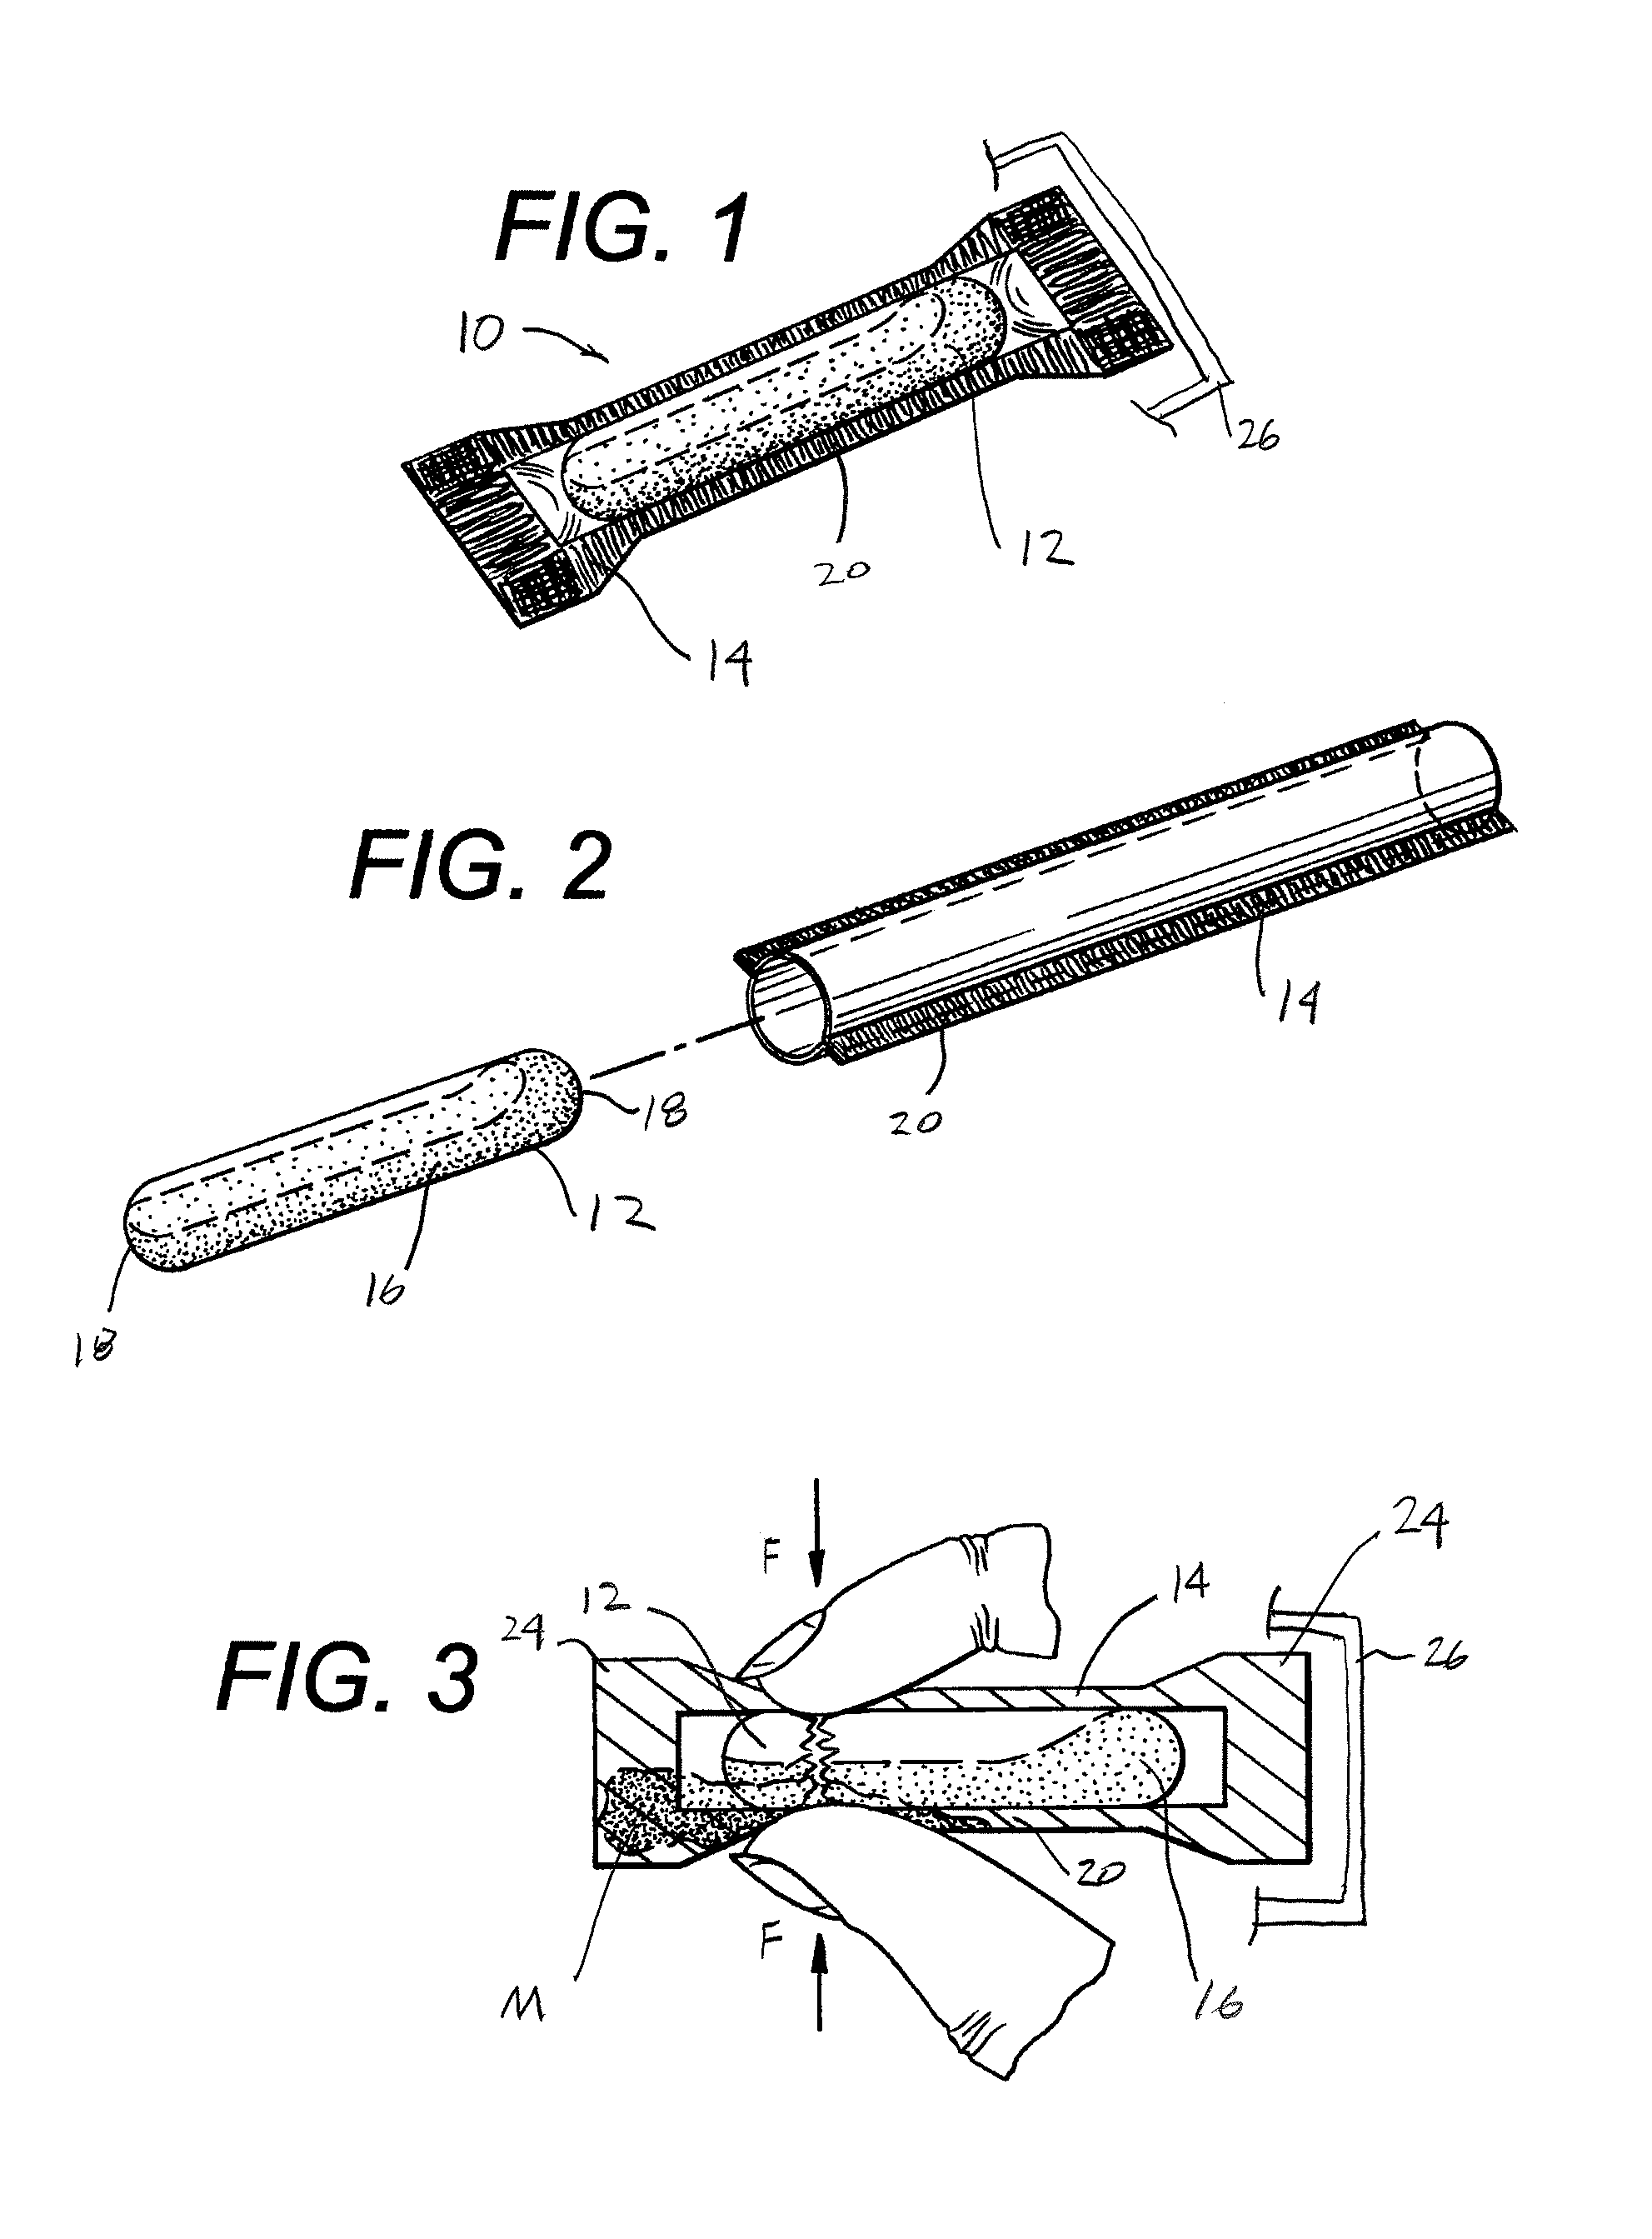 Ampoule dispenser assembly and process